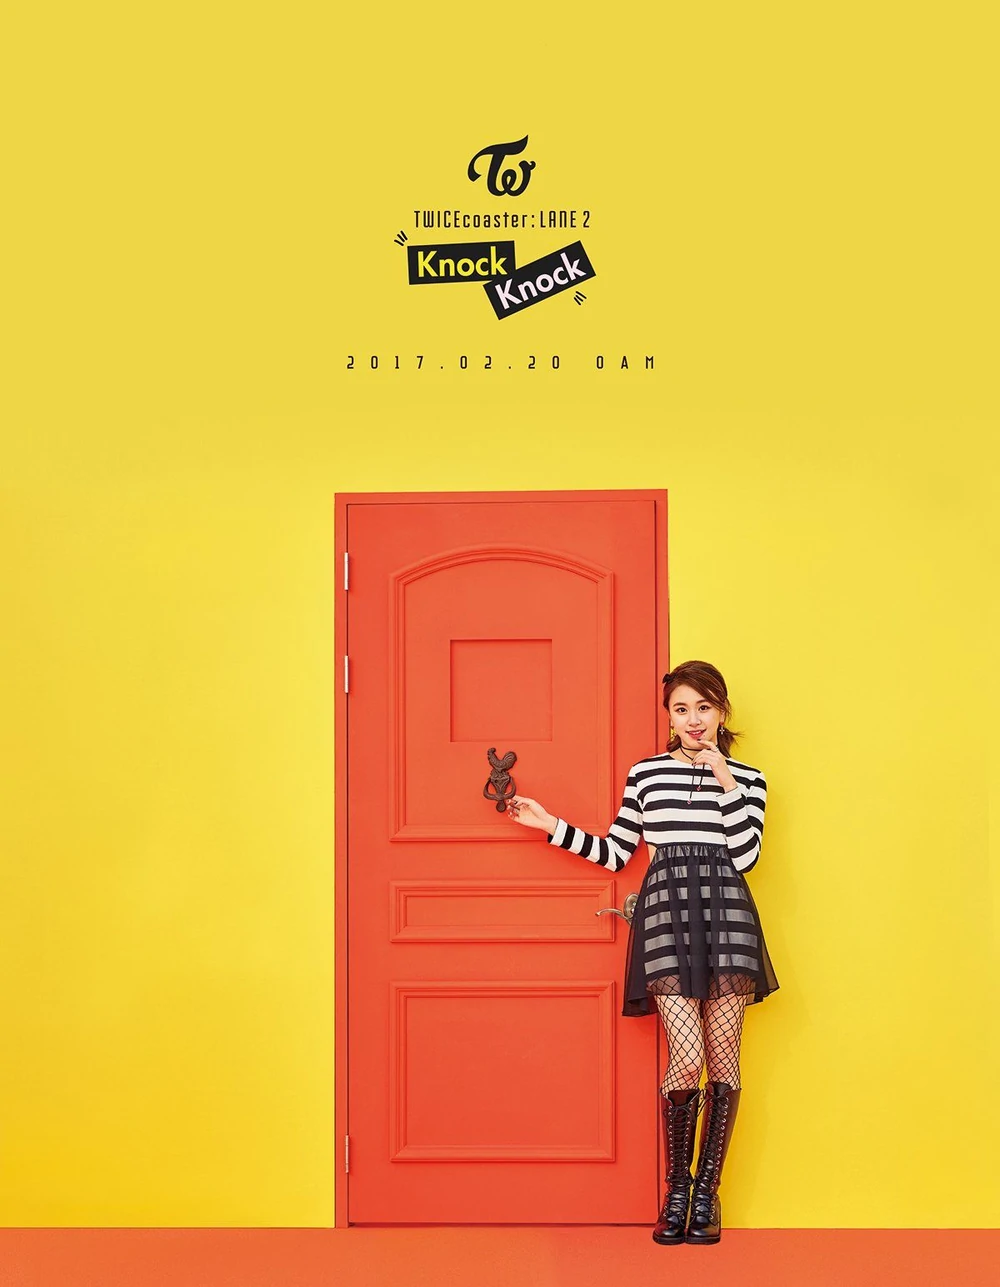 Twice Twicecoaster: Lane 2 Chaeyoung Concept Teaser Picture Image Photo Kpop K-Concept 2